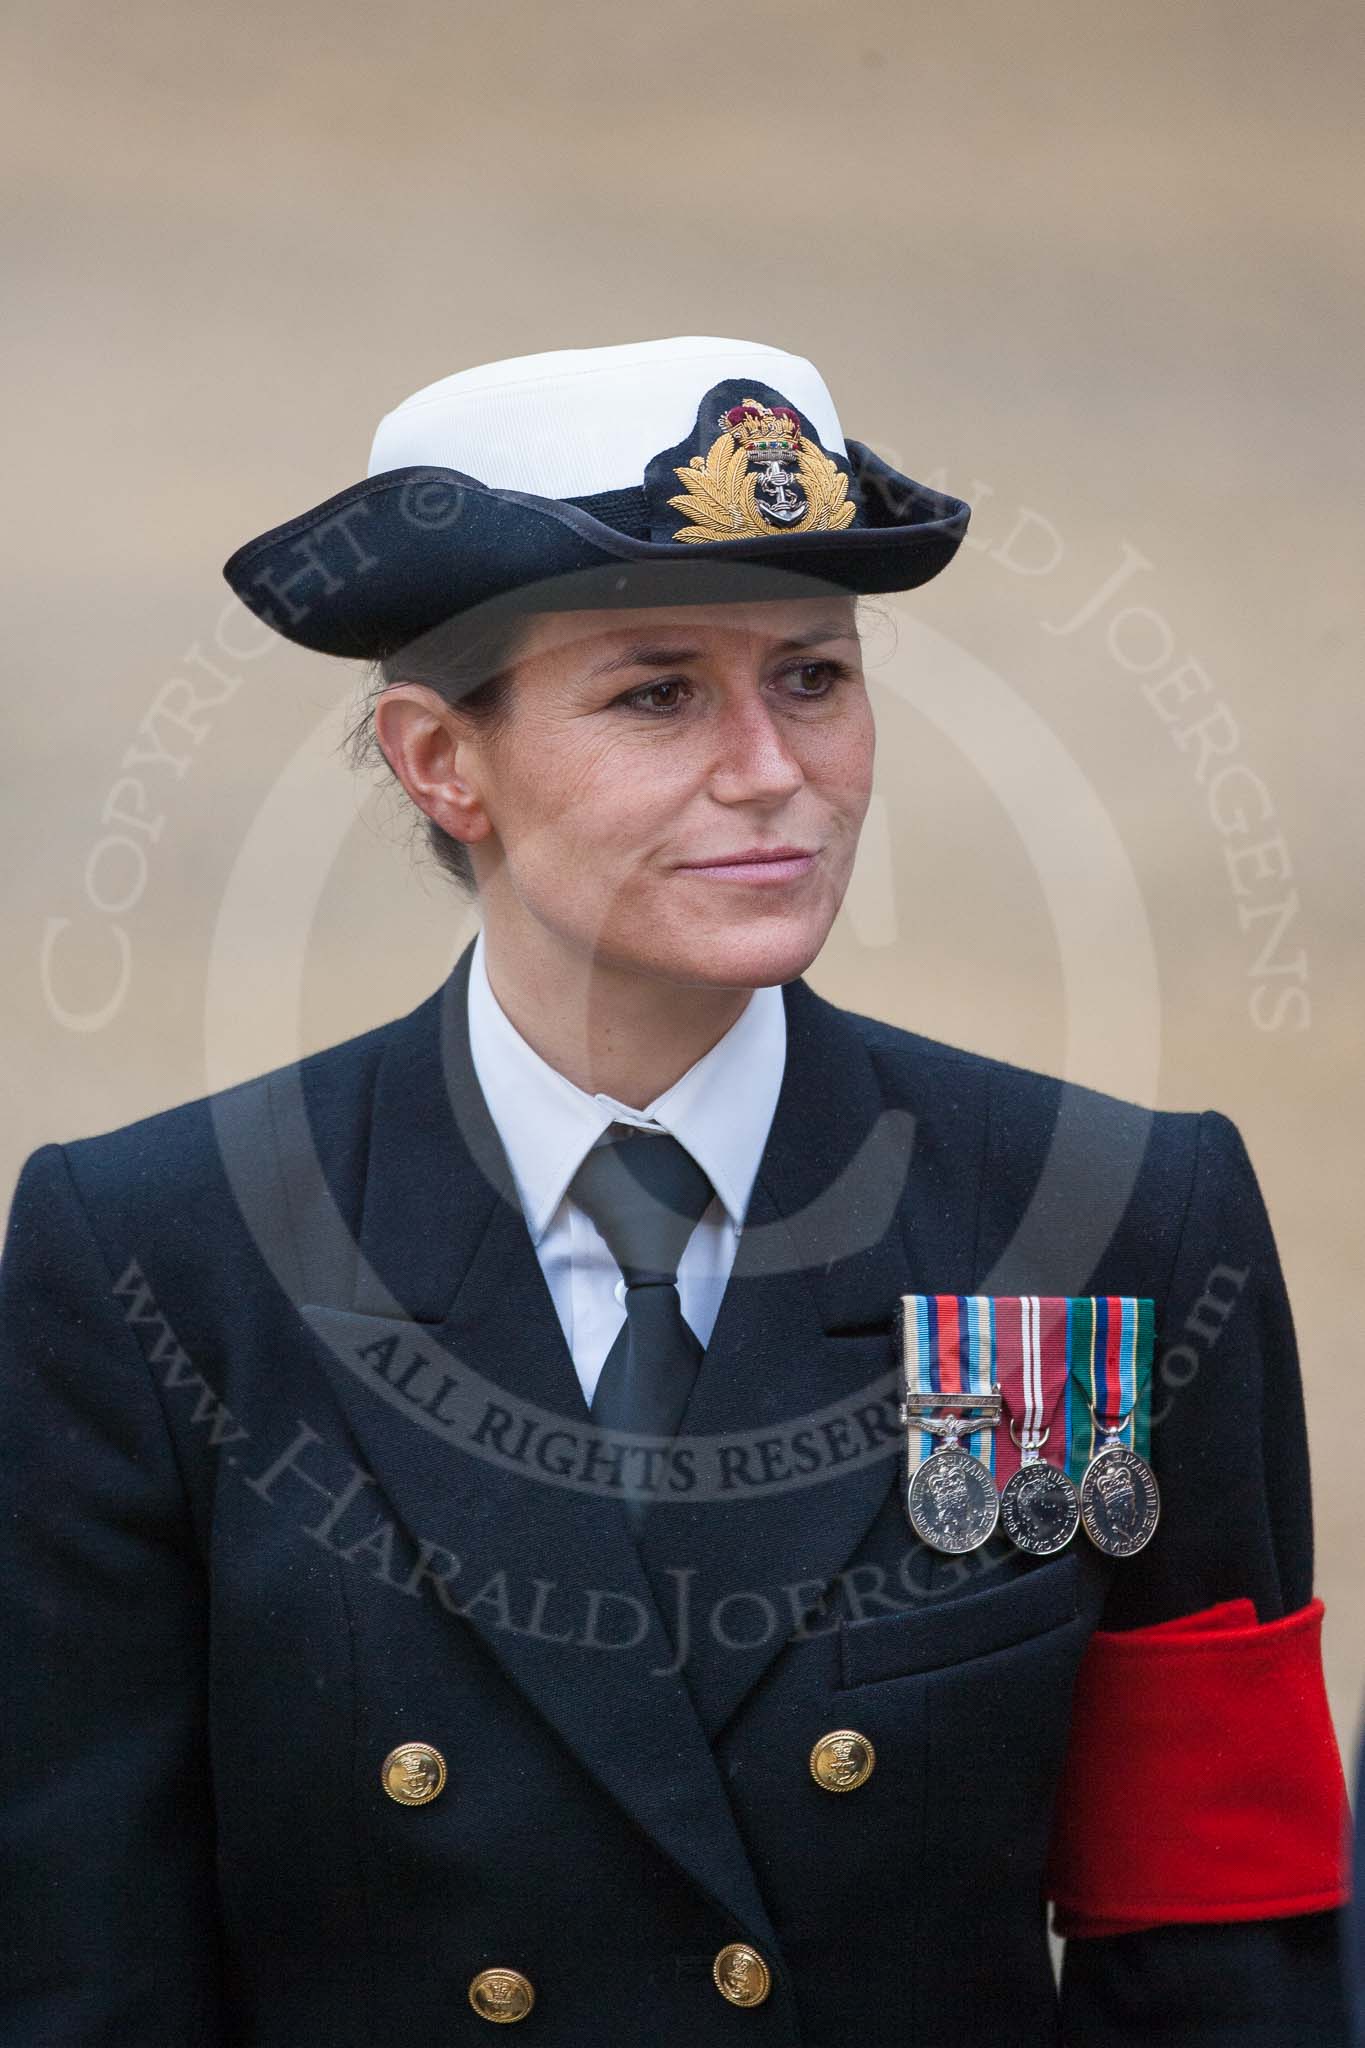 Lord Mayor's Show 2012: A Royal Navy Lieutenant acting as Marshall for the Lord Mayor's Show..
Press stand opposite Mansion House, City of London,
London,
Greater London,
United Kingdom,
on 10 November 2012 at 10:24, image #67